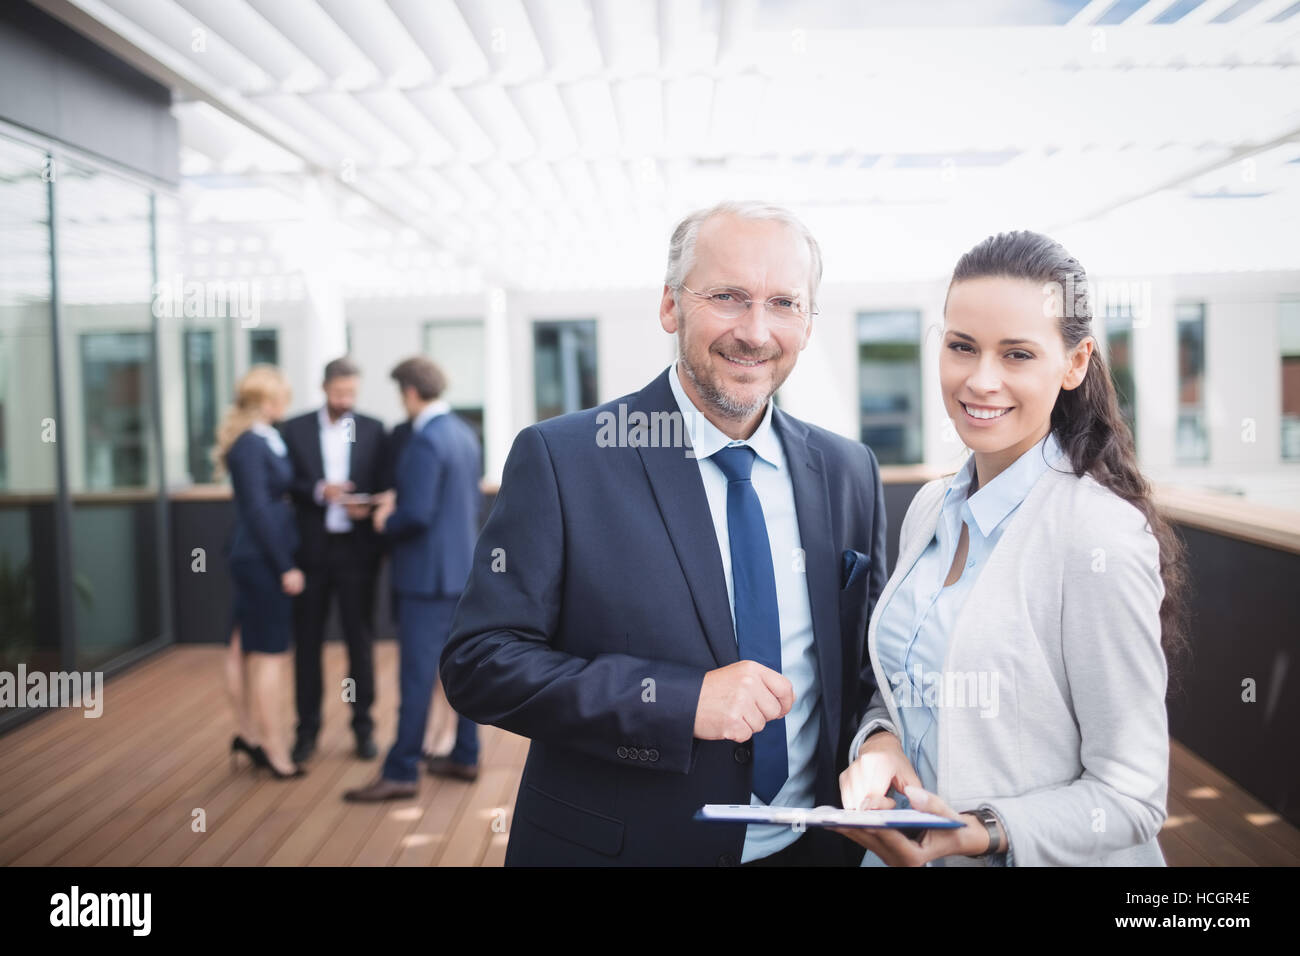 Businessman discussing over document with colleague Stock Photo